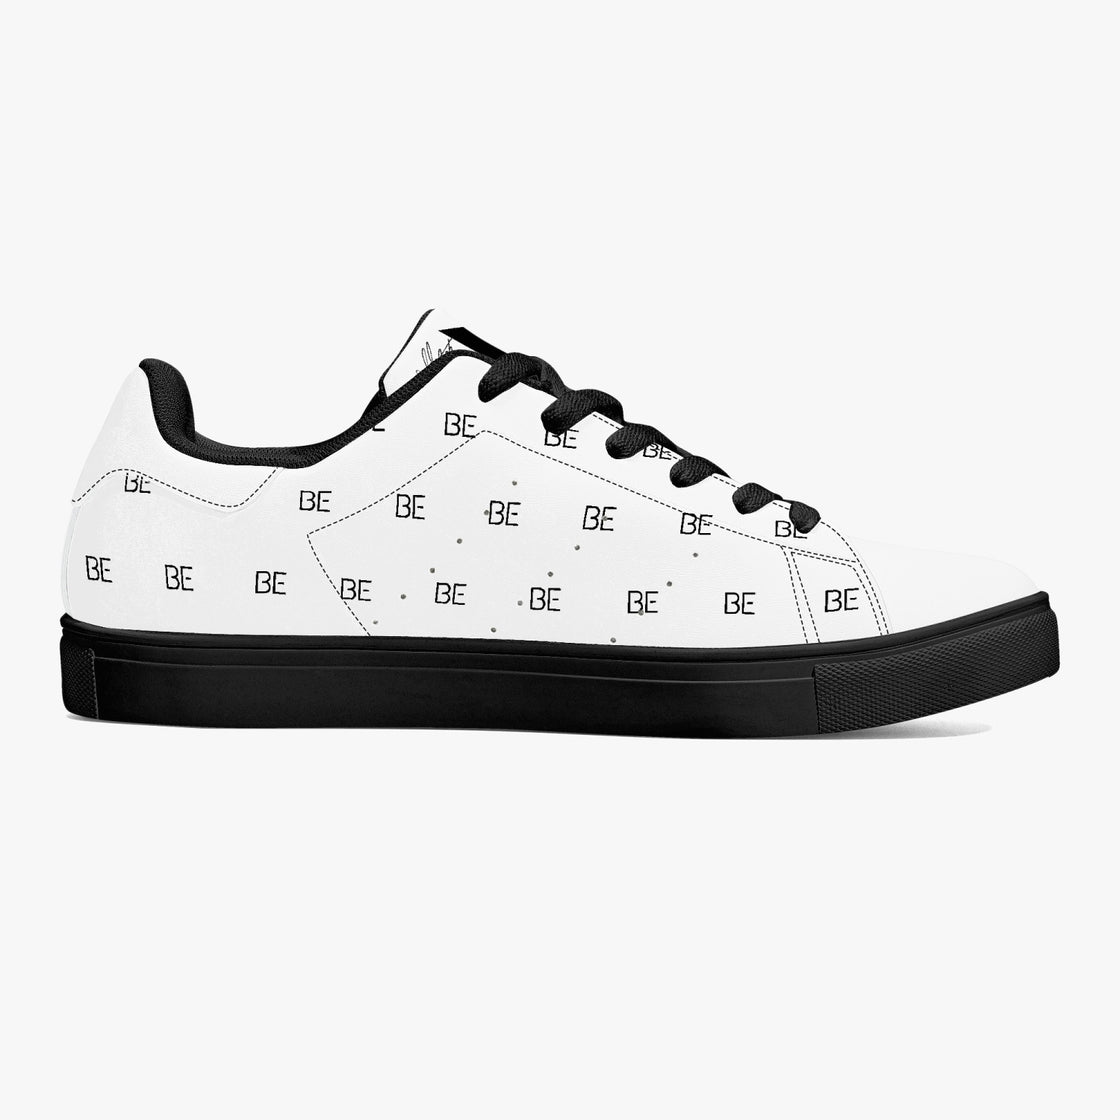 BTS Casual Trendy Sneaker- BE Edition